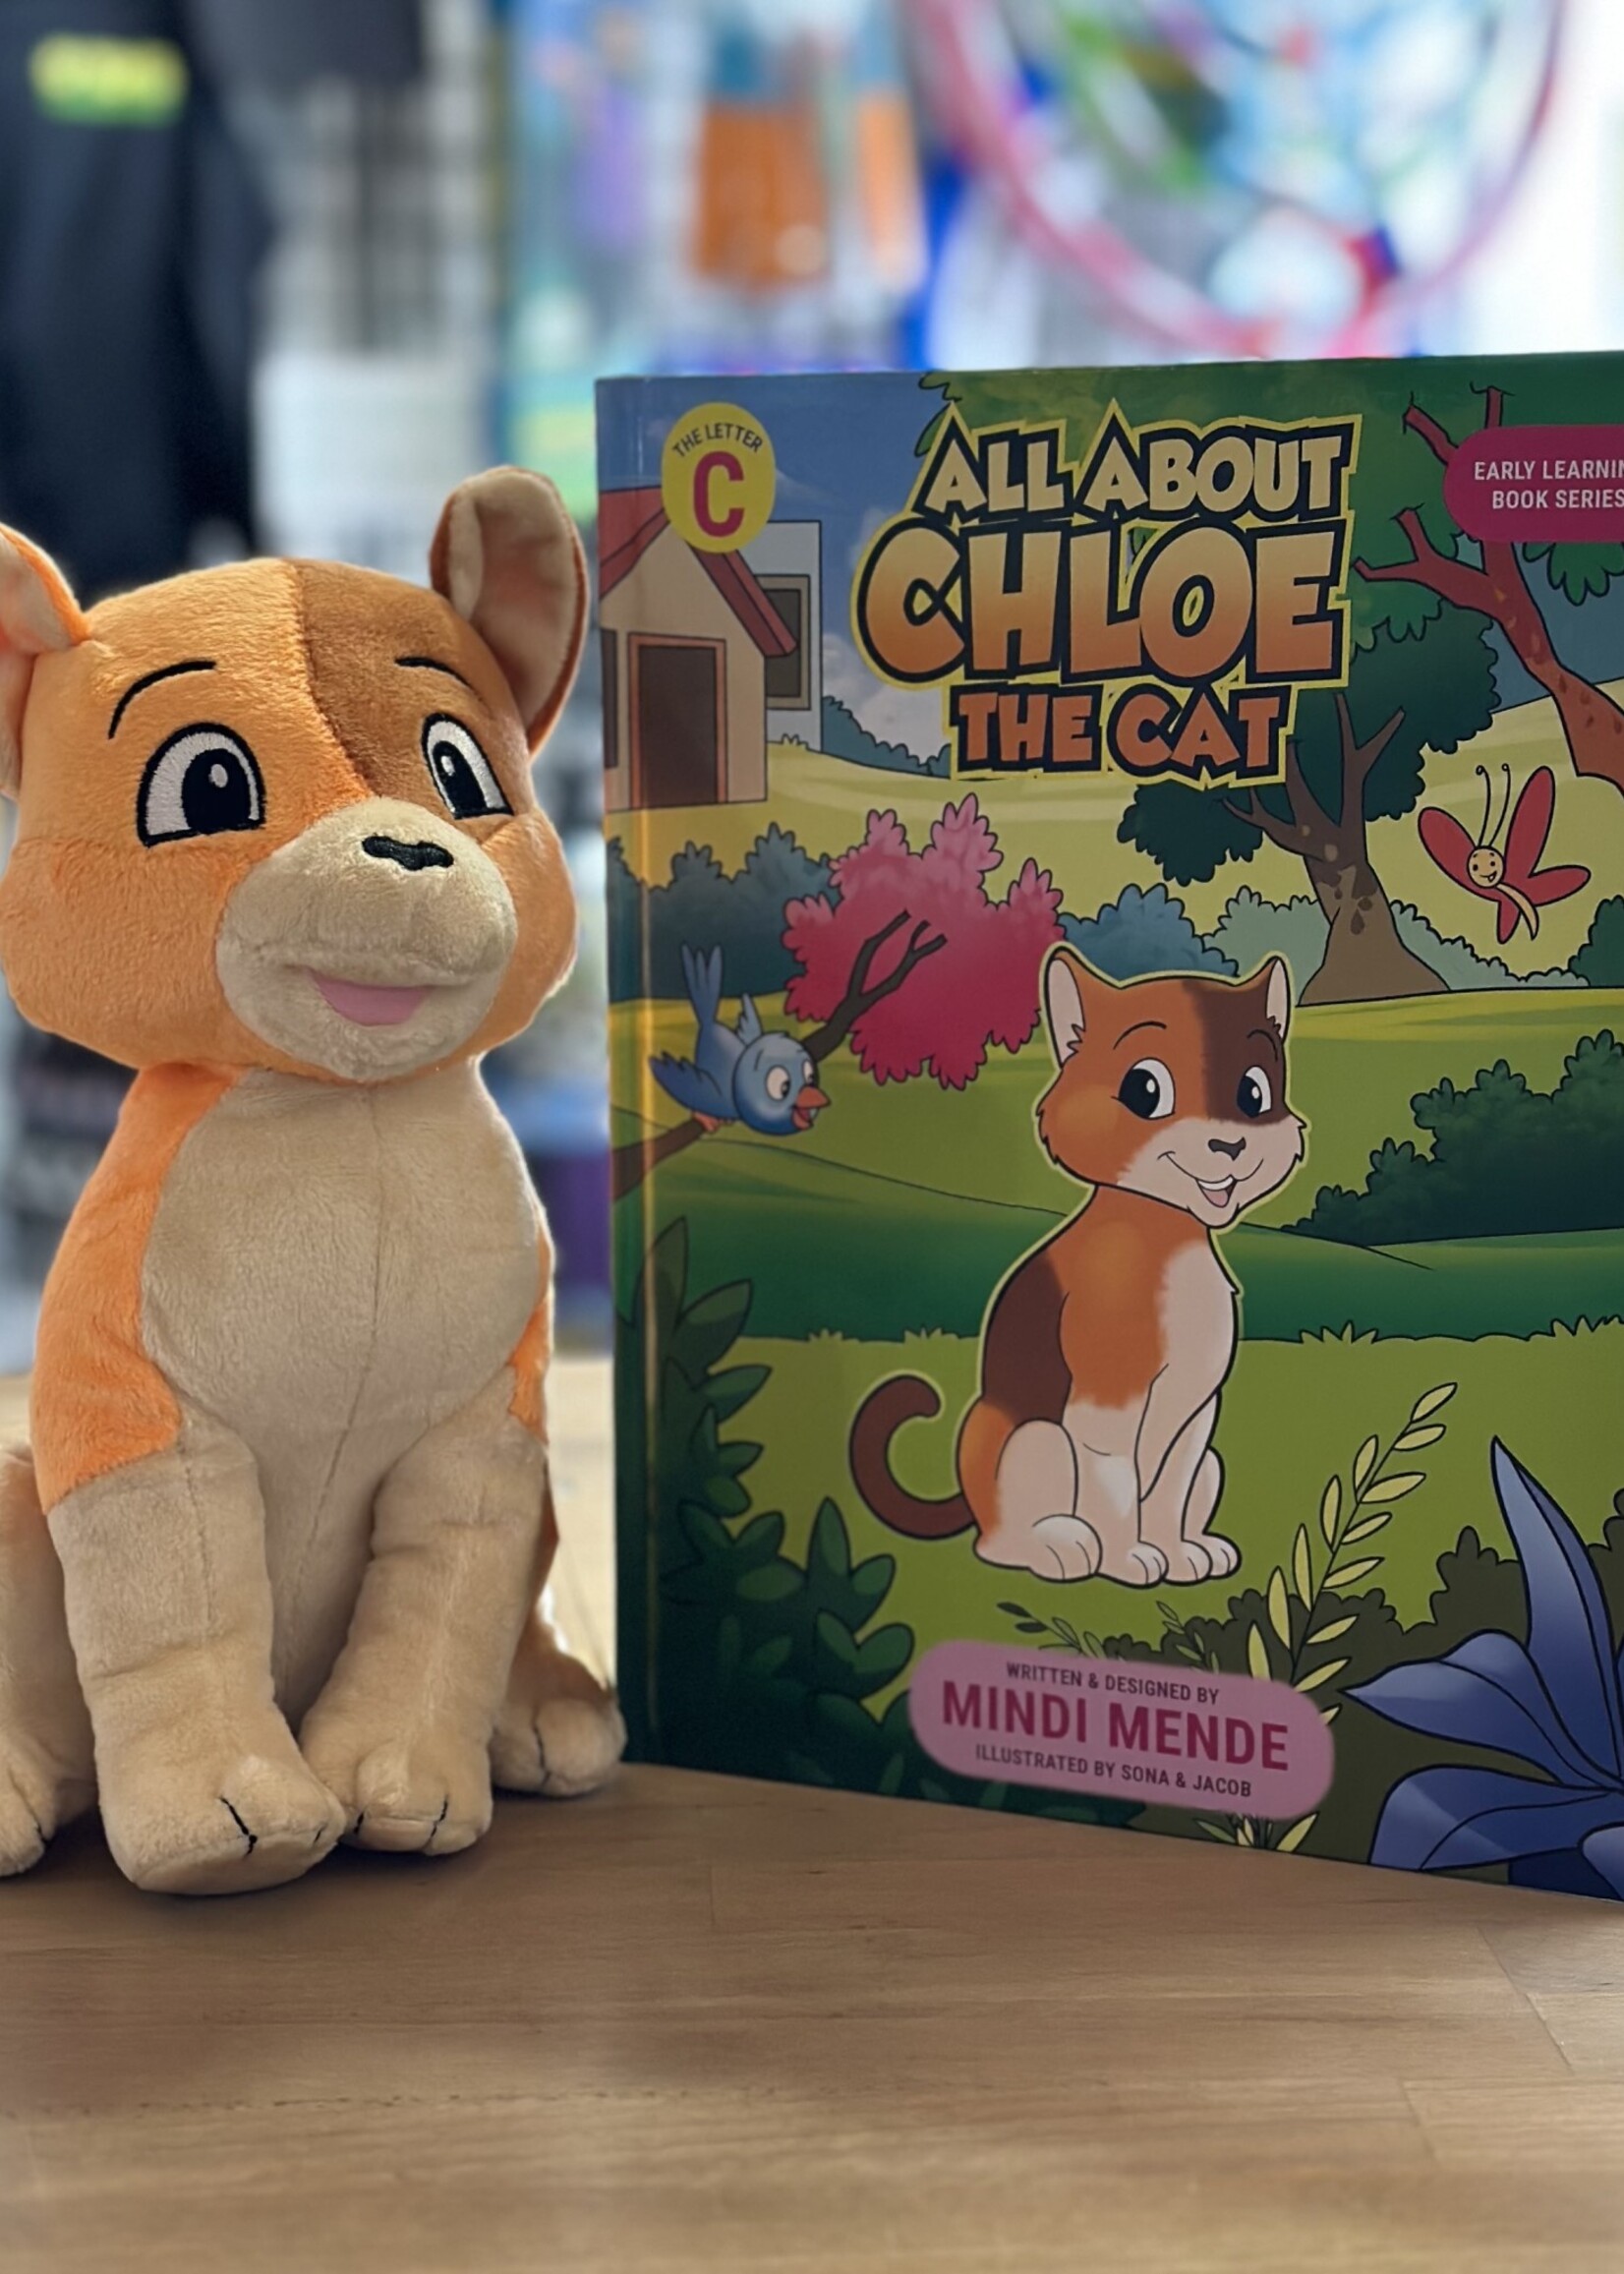 Book - All About Chloe the Cat